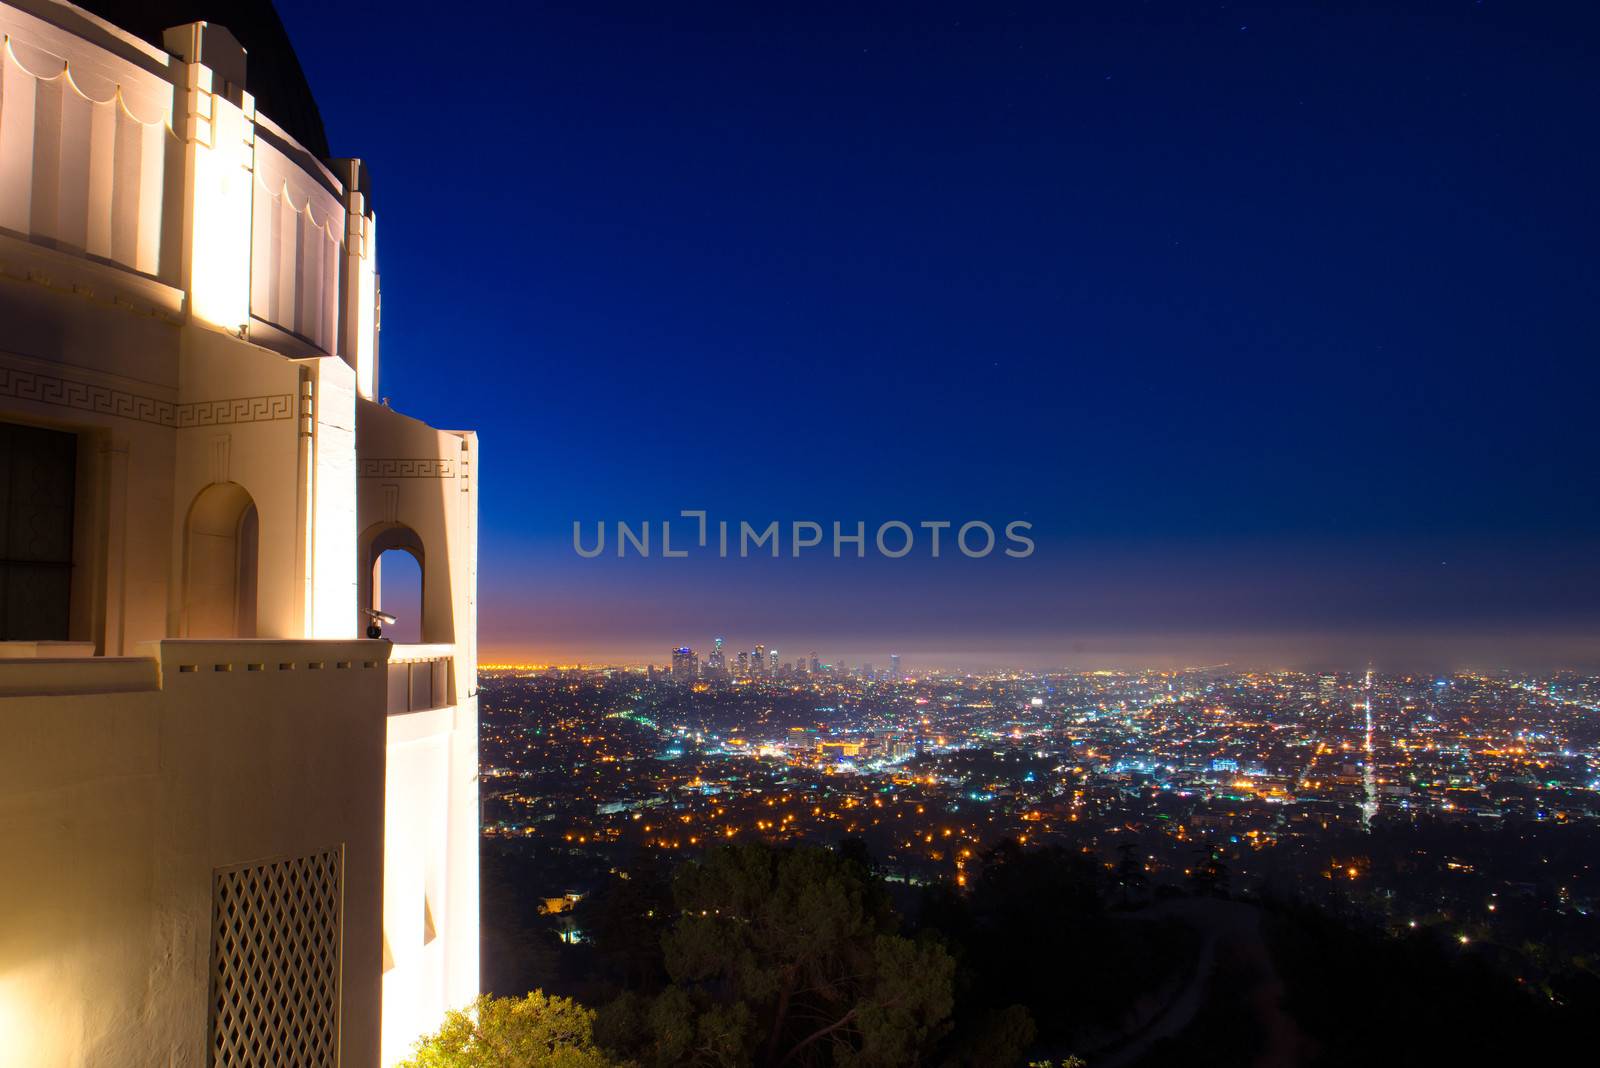 City of Los Angeles as seen from the Griffith Observatory at night, Los Angeles County, California, USA